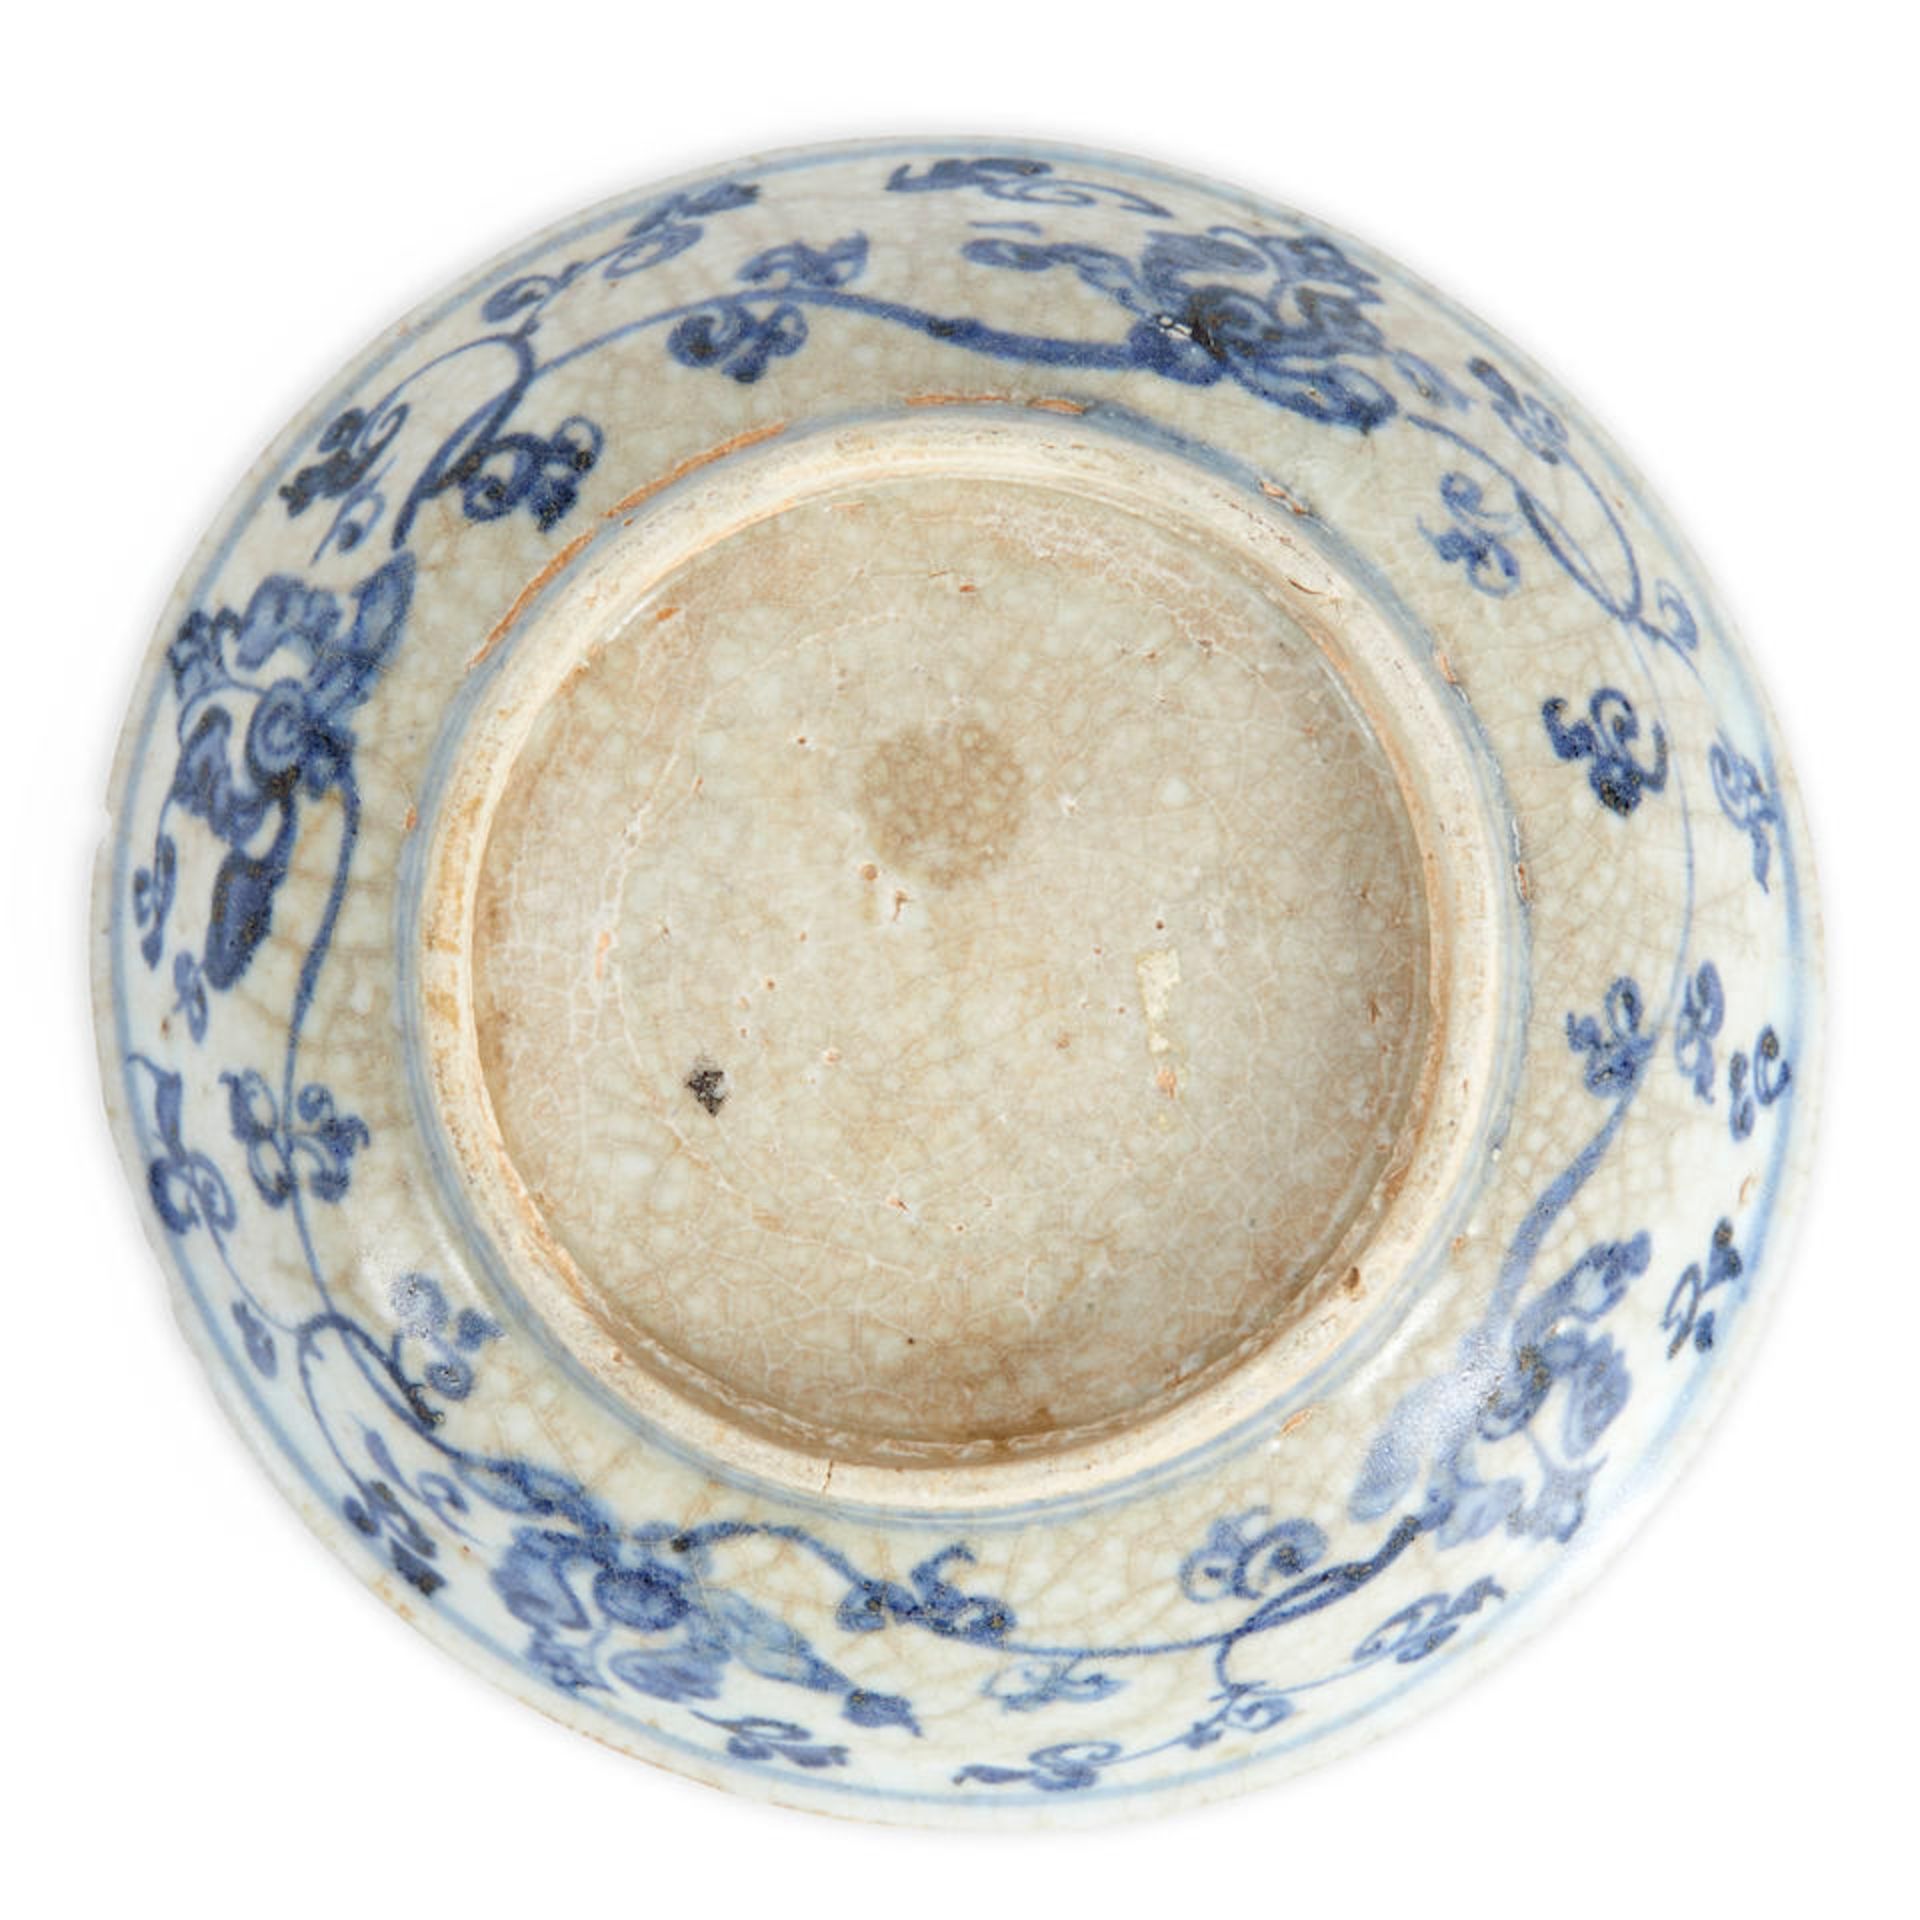 BLUE AND WHITE SHIPWRECK DISH - Image 2 of 4